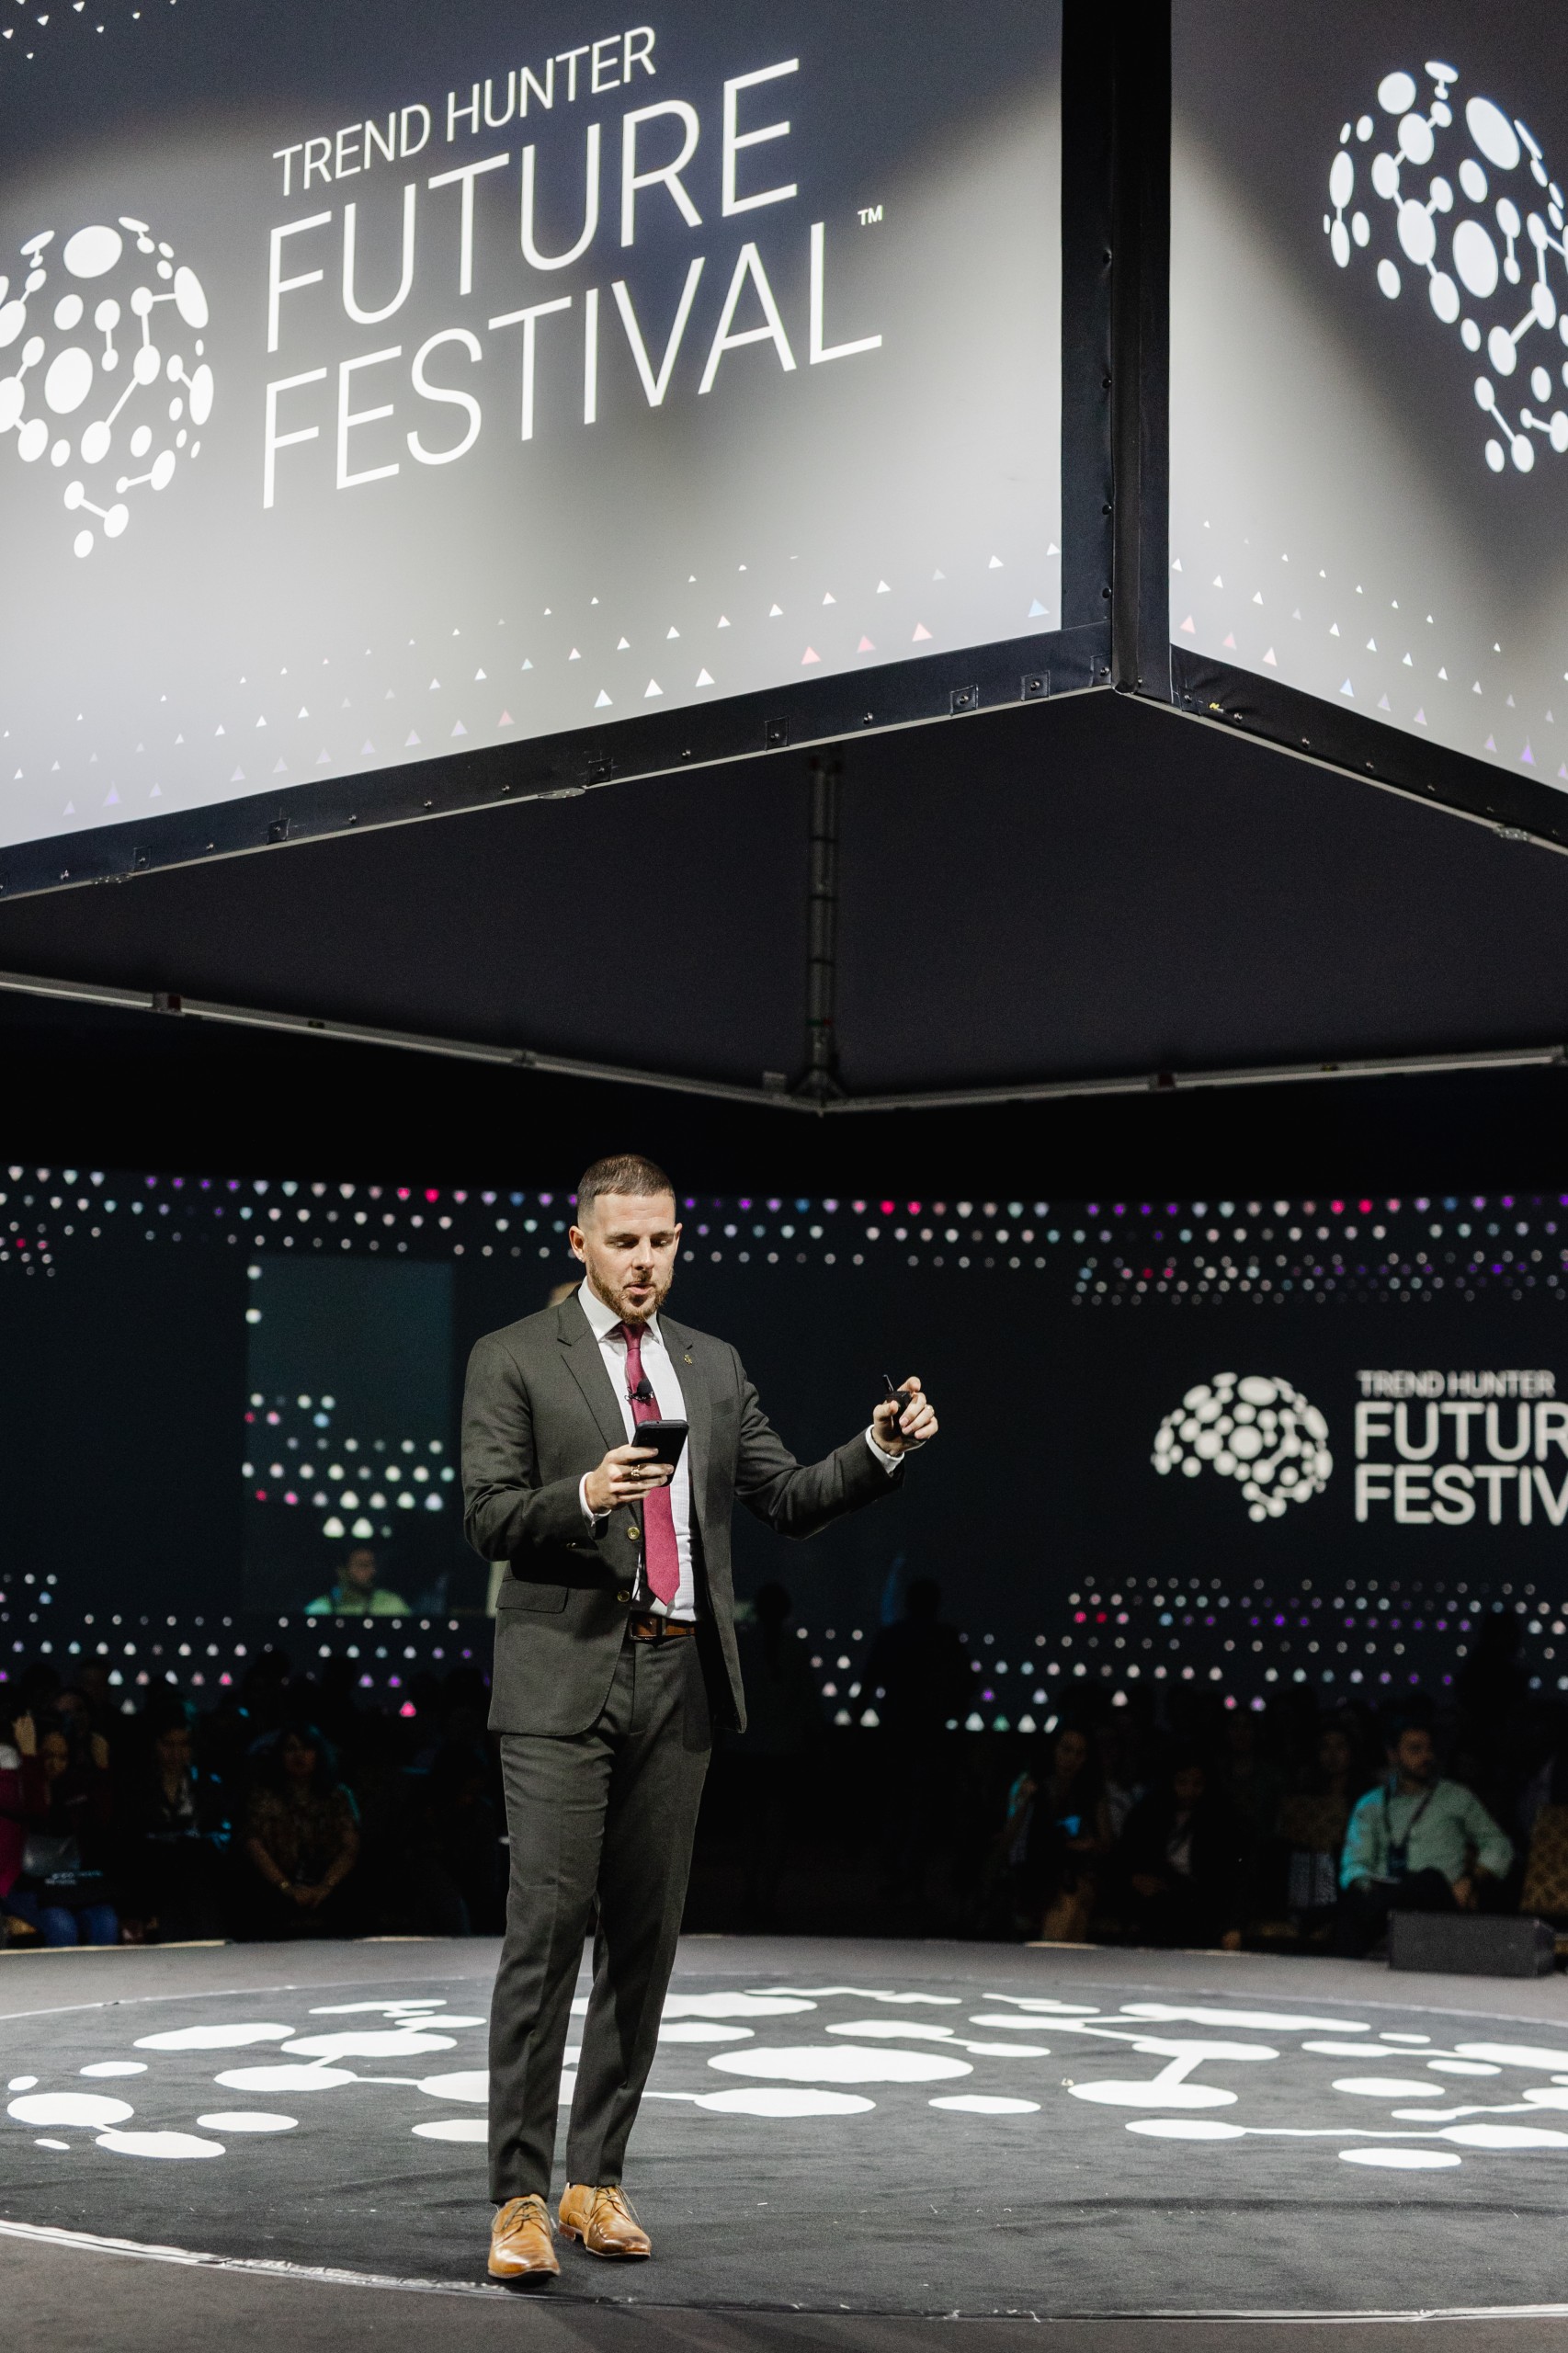 An elegantly dressed man standing on stage at the future festival, captured in captivating event photography.